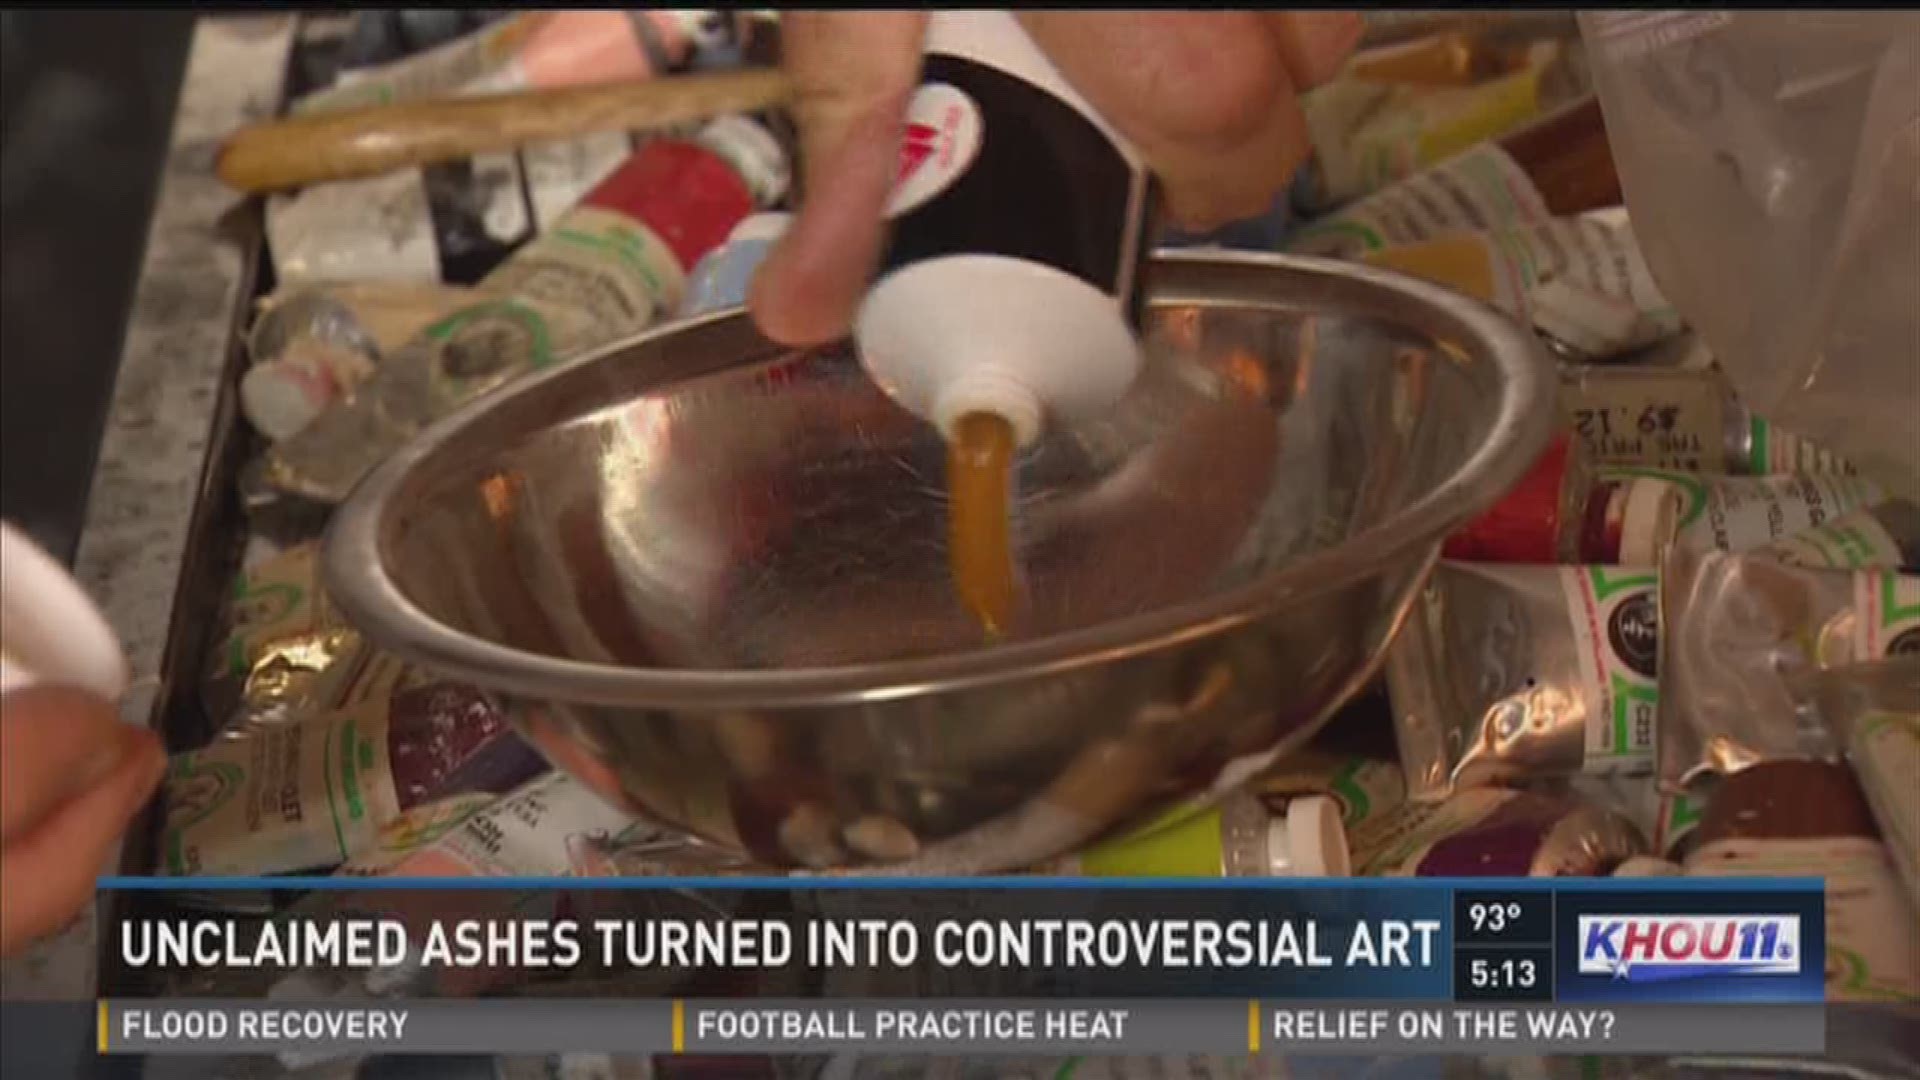 A local artist is creating paintings with a controversial medium.